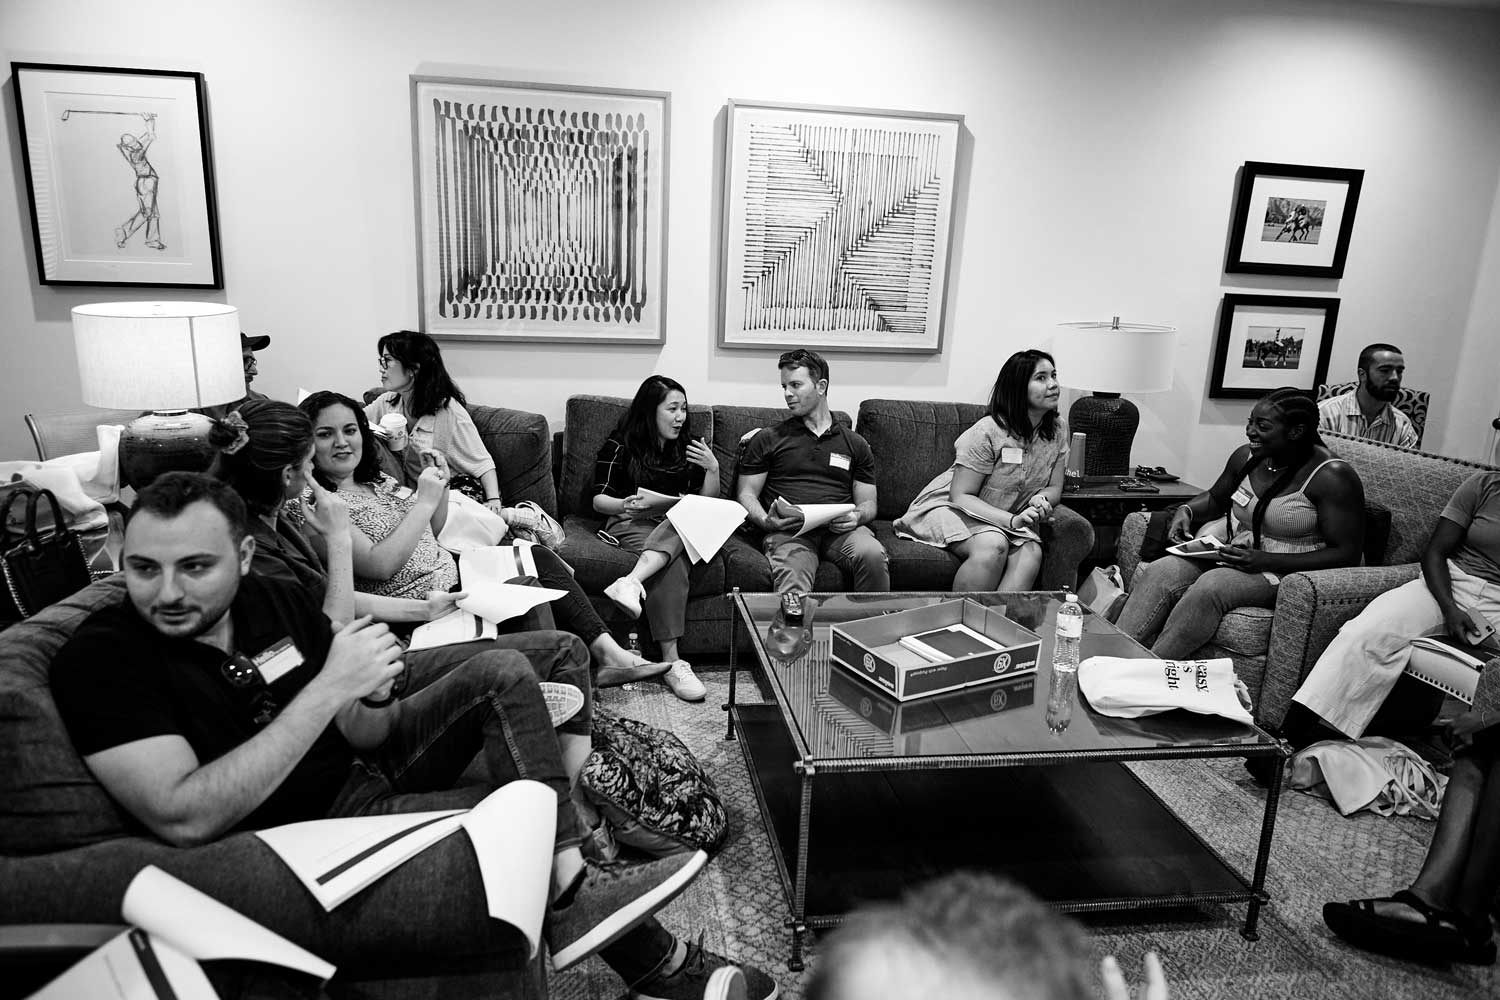 A group of people from the customer experience team at Atticus meet in a comfortable room.